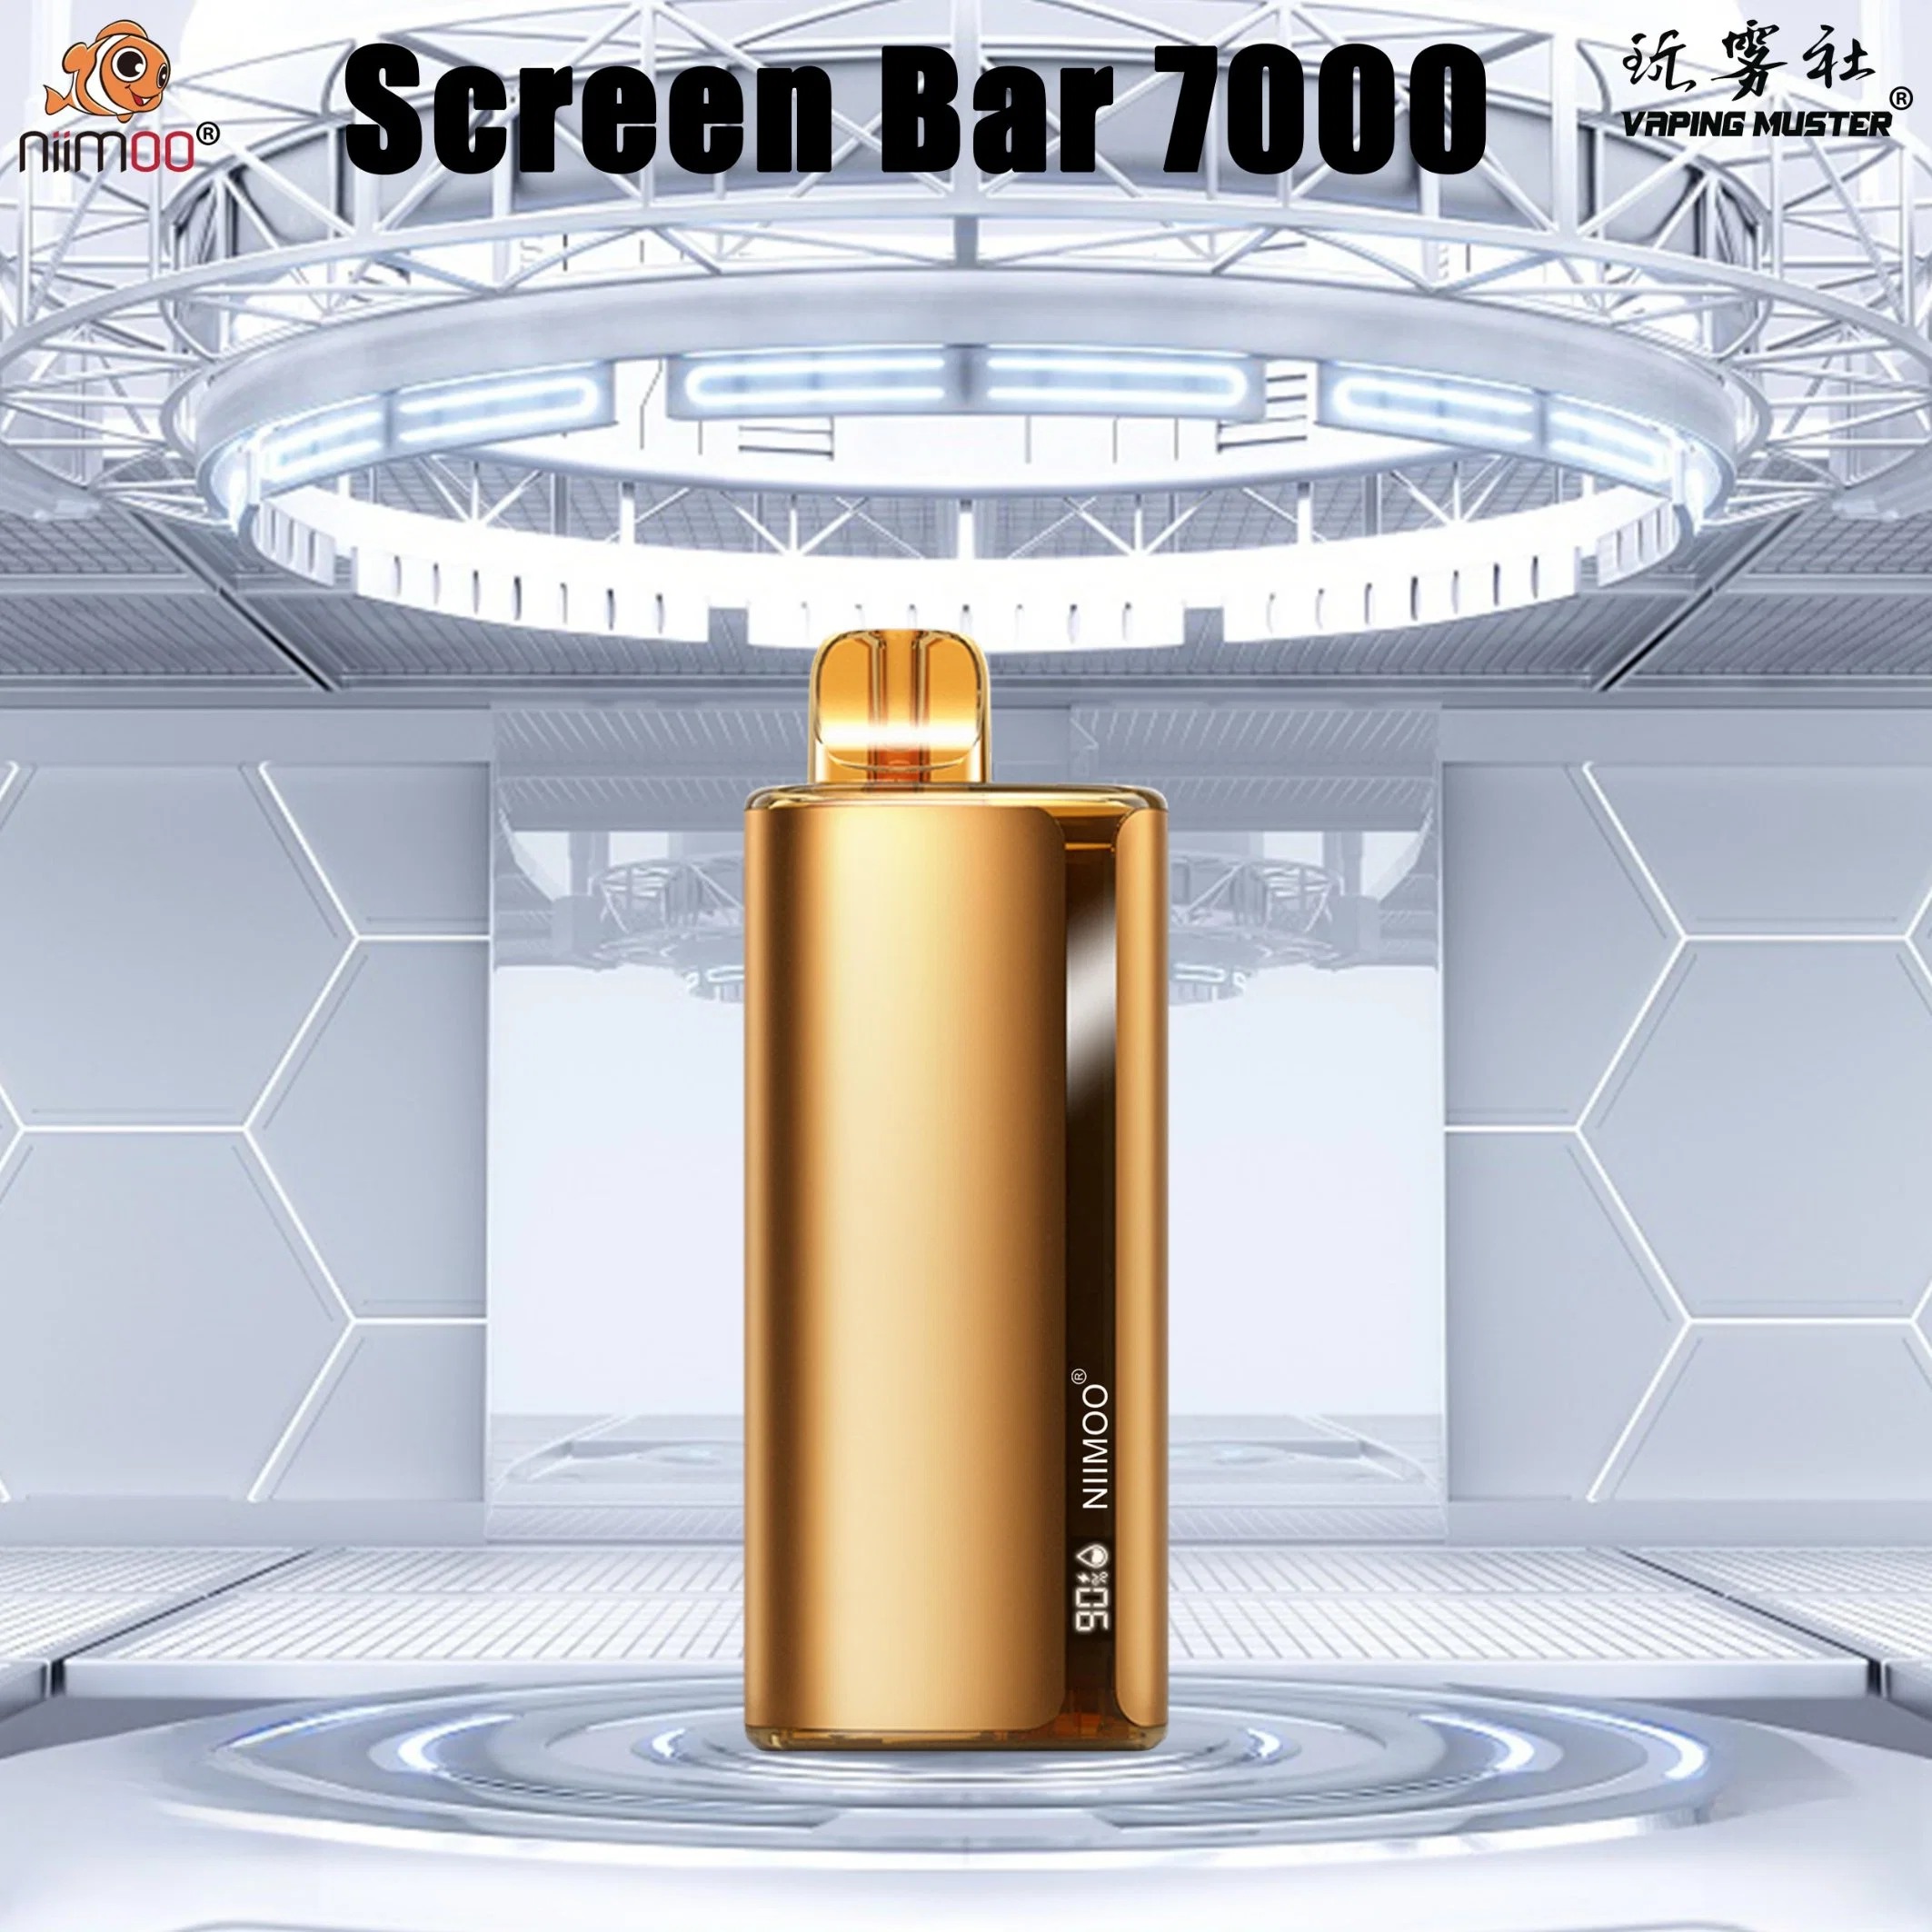 Niimoo OEM Shenzhen Wholesale/Supplier E Cigarette Device Big Vapor Bar 7000 Puffs Disposable/Chargeable Vape with Display